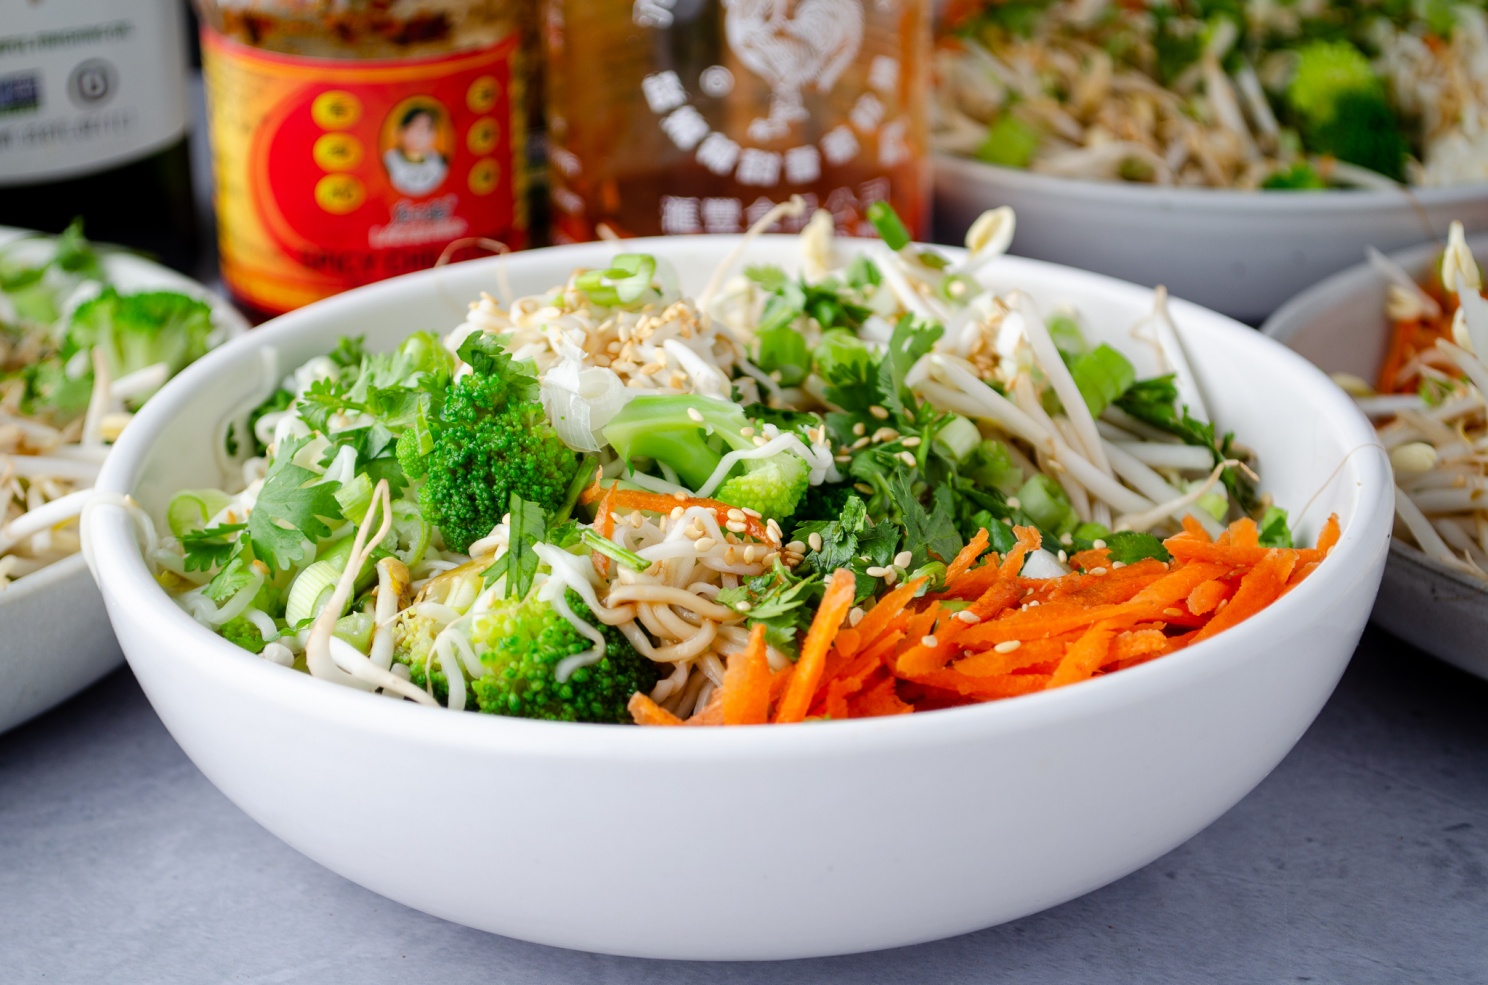 A root formula for a quick and easy ramen salad with fresh vegetables